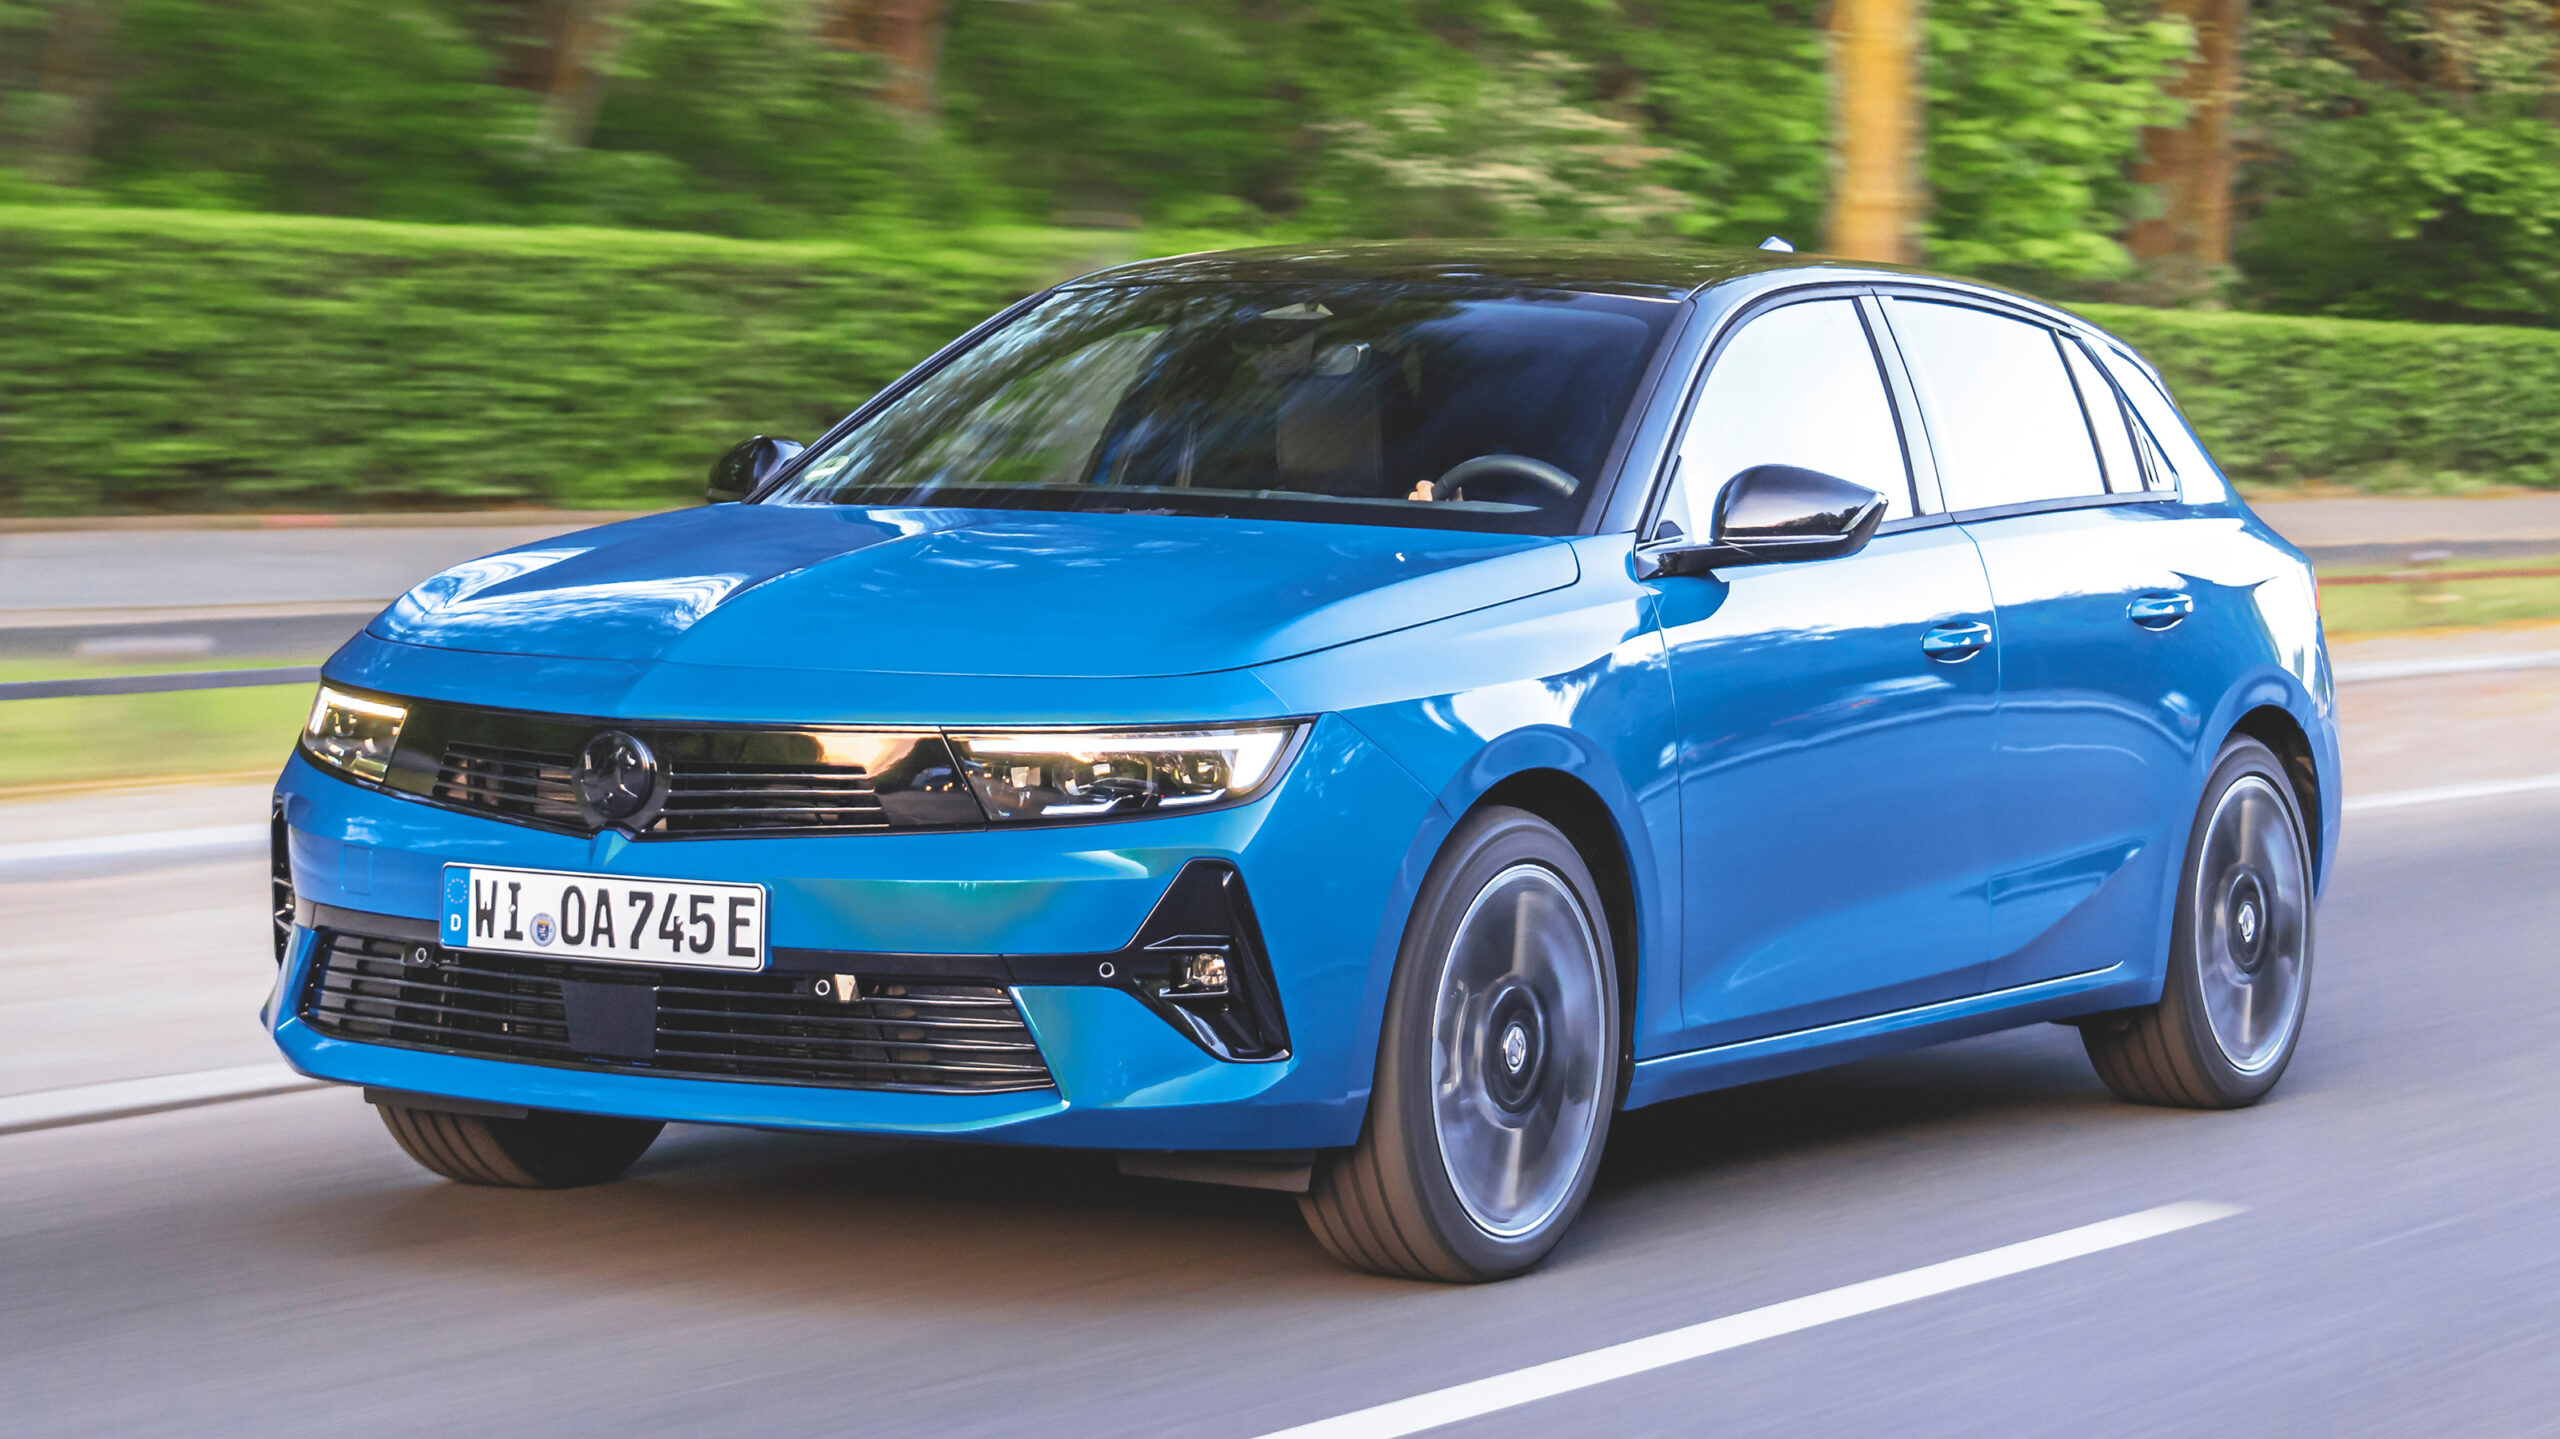 Vauxhall Astra Electric front scaled https://electriccarfinder.com/2023-vauxhall-astra-electric-price/